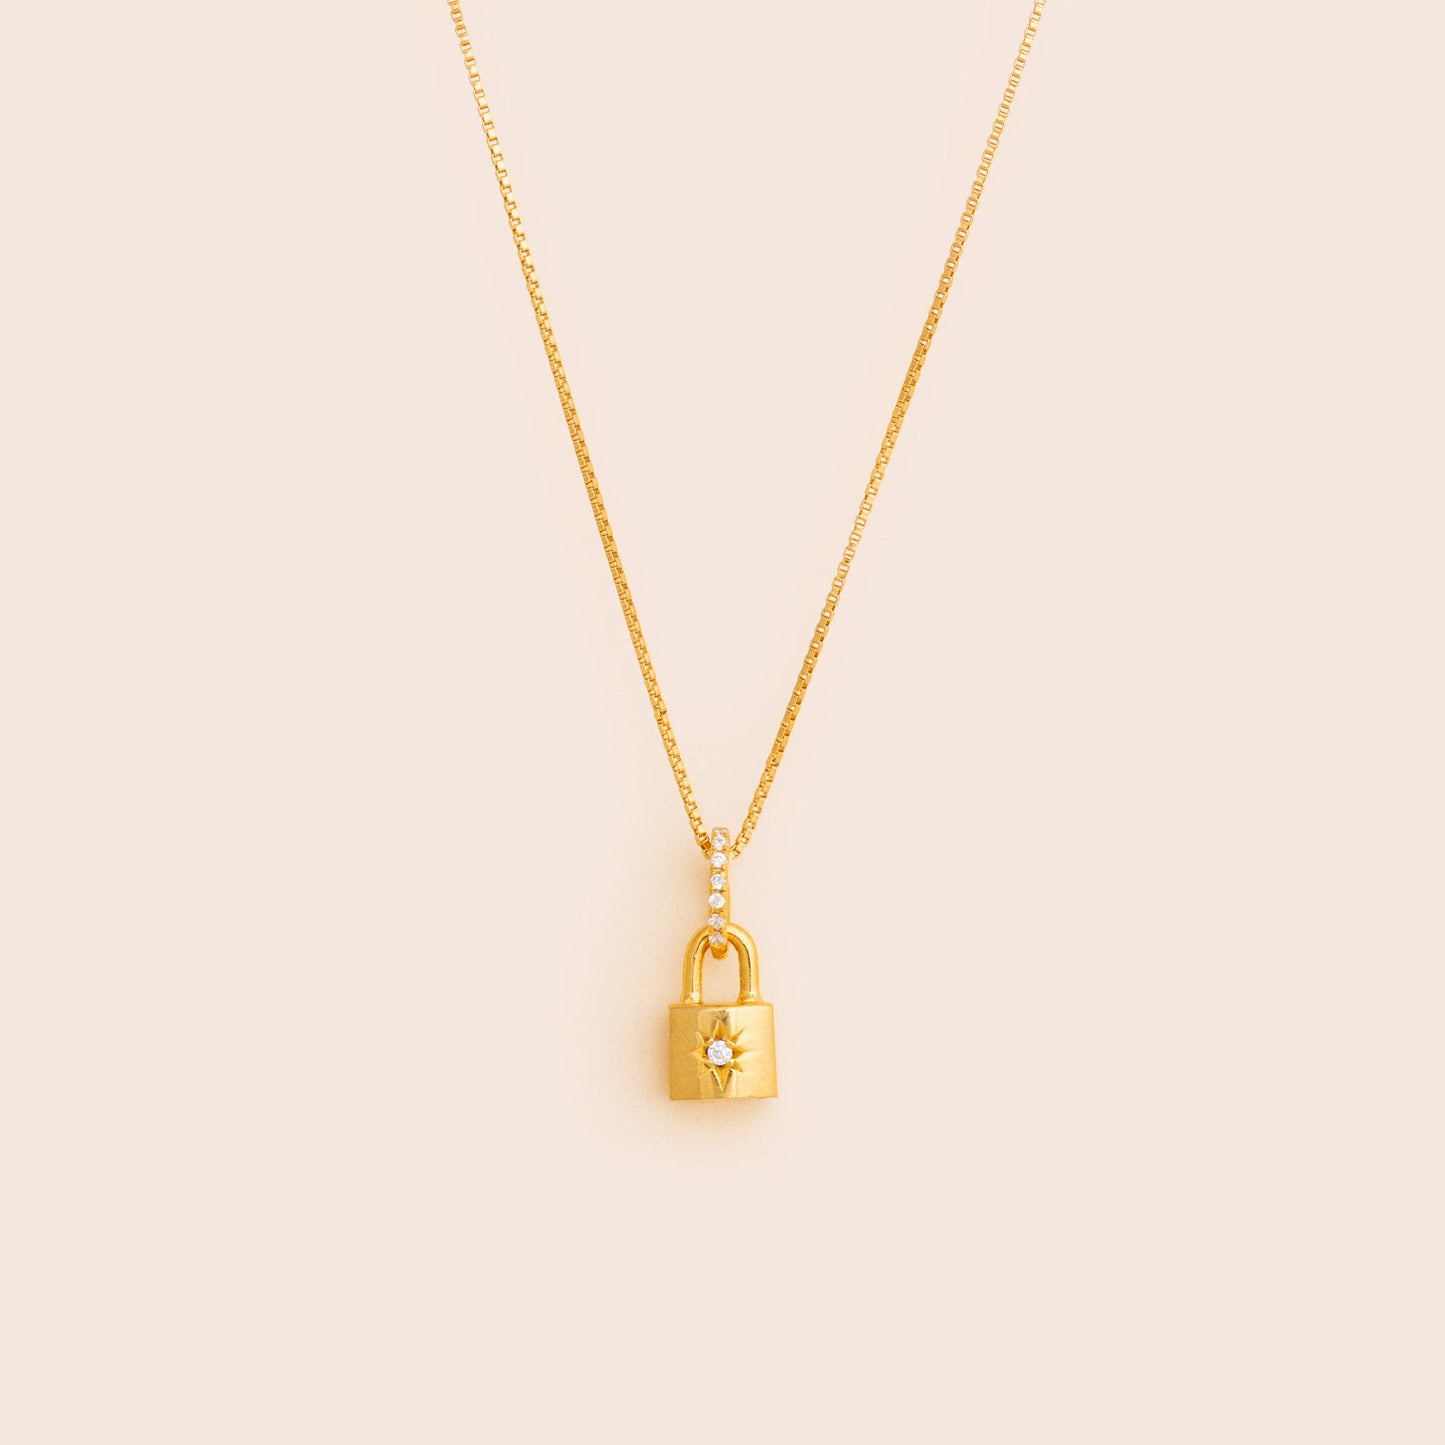 Load image into Gallery viewer, Northern Star Padlock Necklace - Gold Filled - Gemlet
